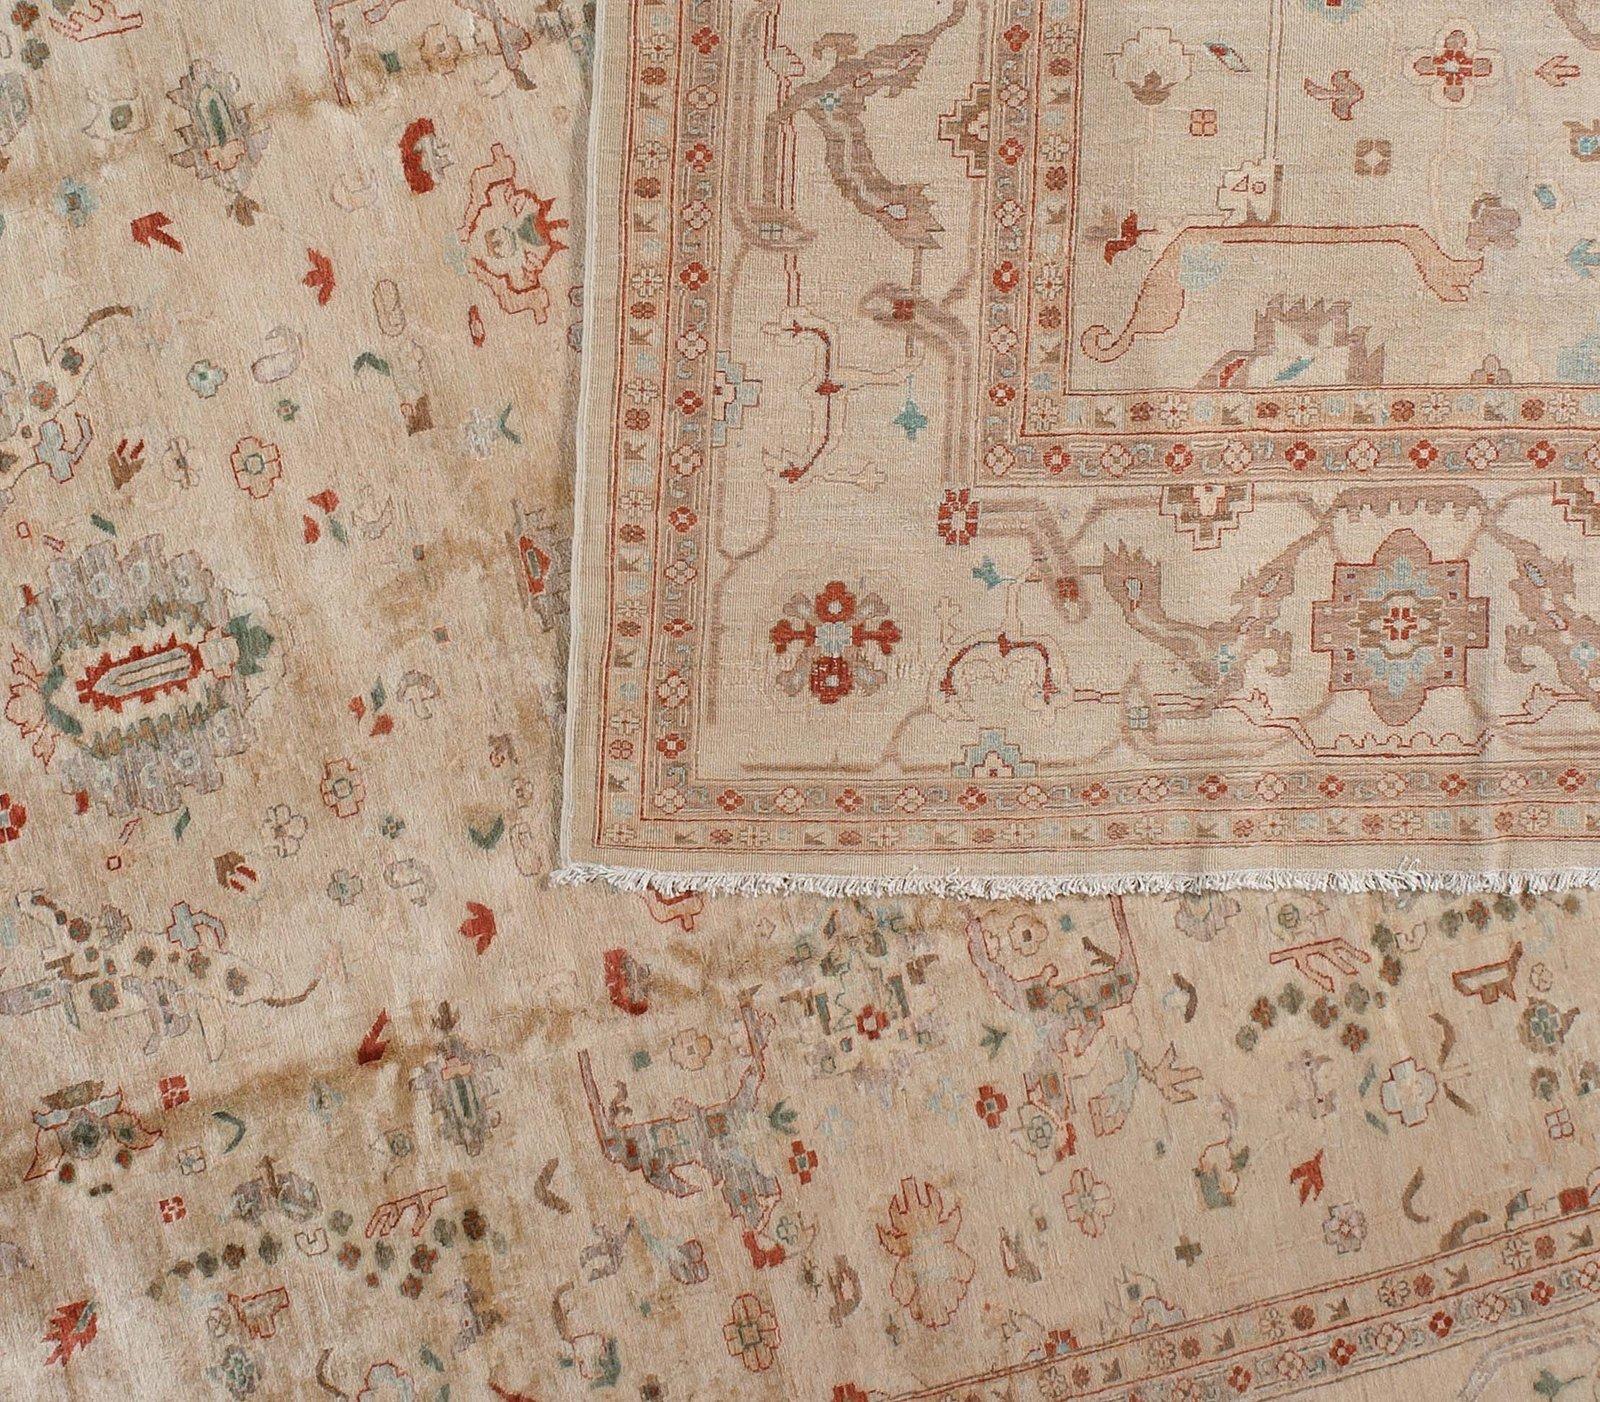 Thin red and green ribbons establish the slightly elongated proportions of this tradition Pakistani wool area rug. A delicate floral pattern in light green, red, coral and taupe adds a charming overlay to the warm and neutral tones of a beige